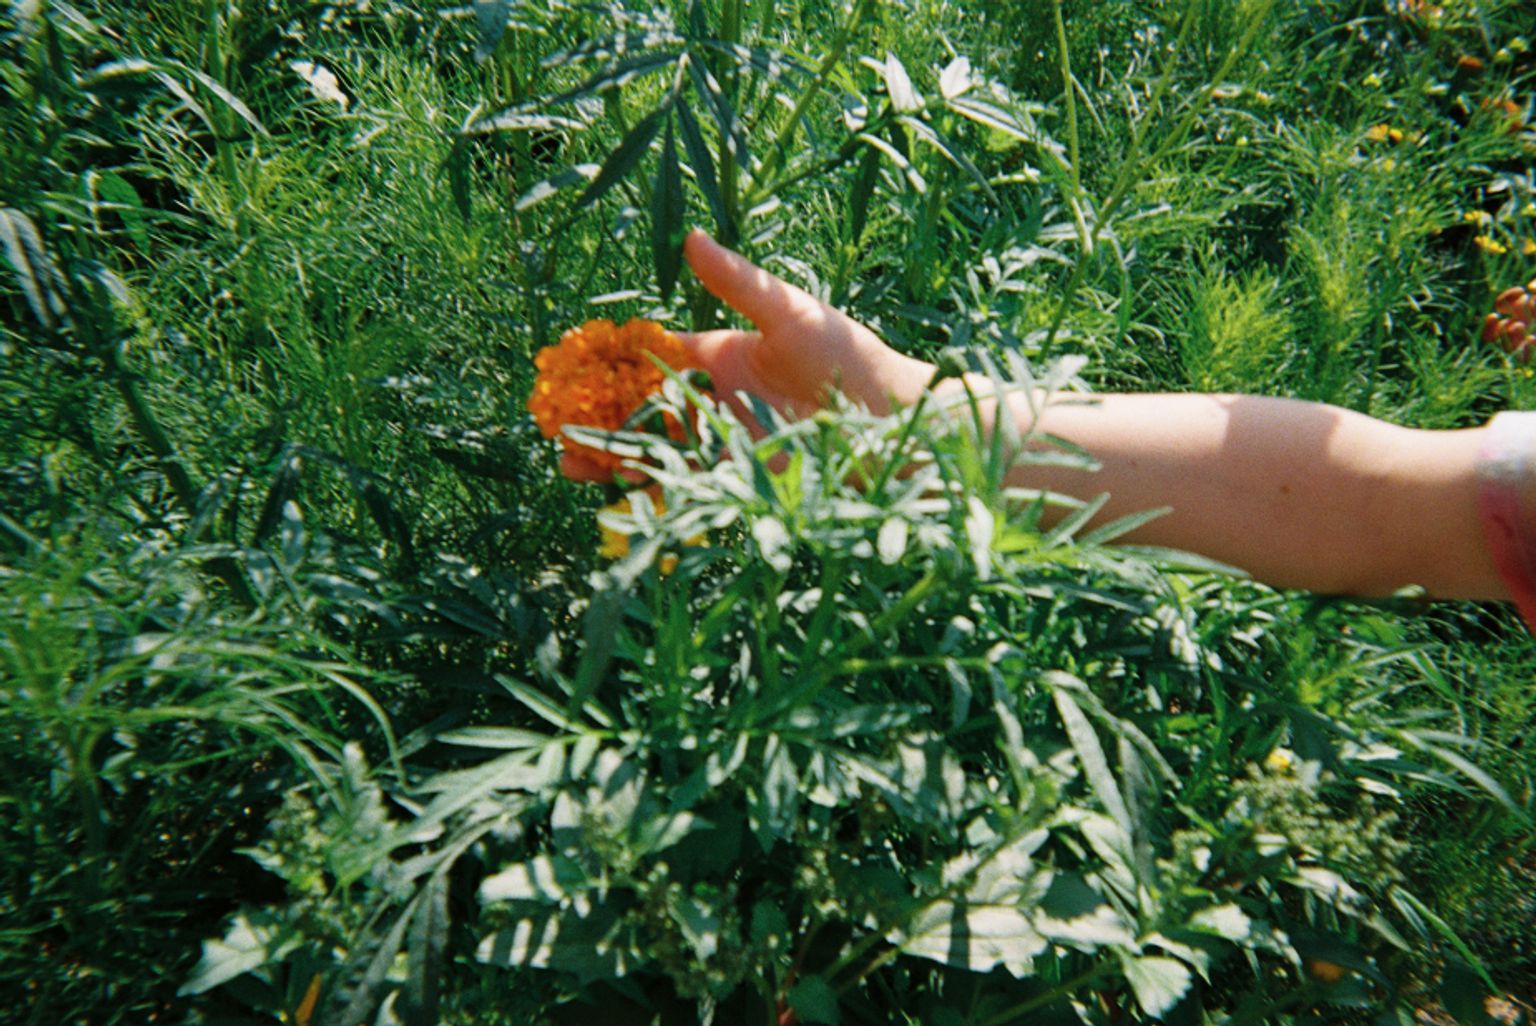 Light skin arm and hand reaching toward an orange marigold in the middle of green leaves